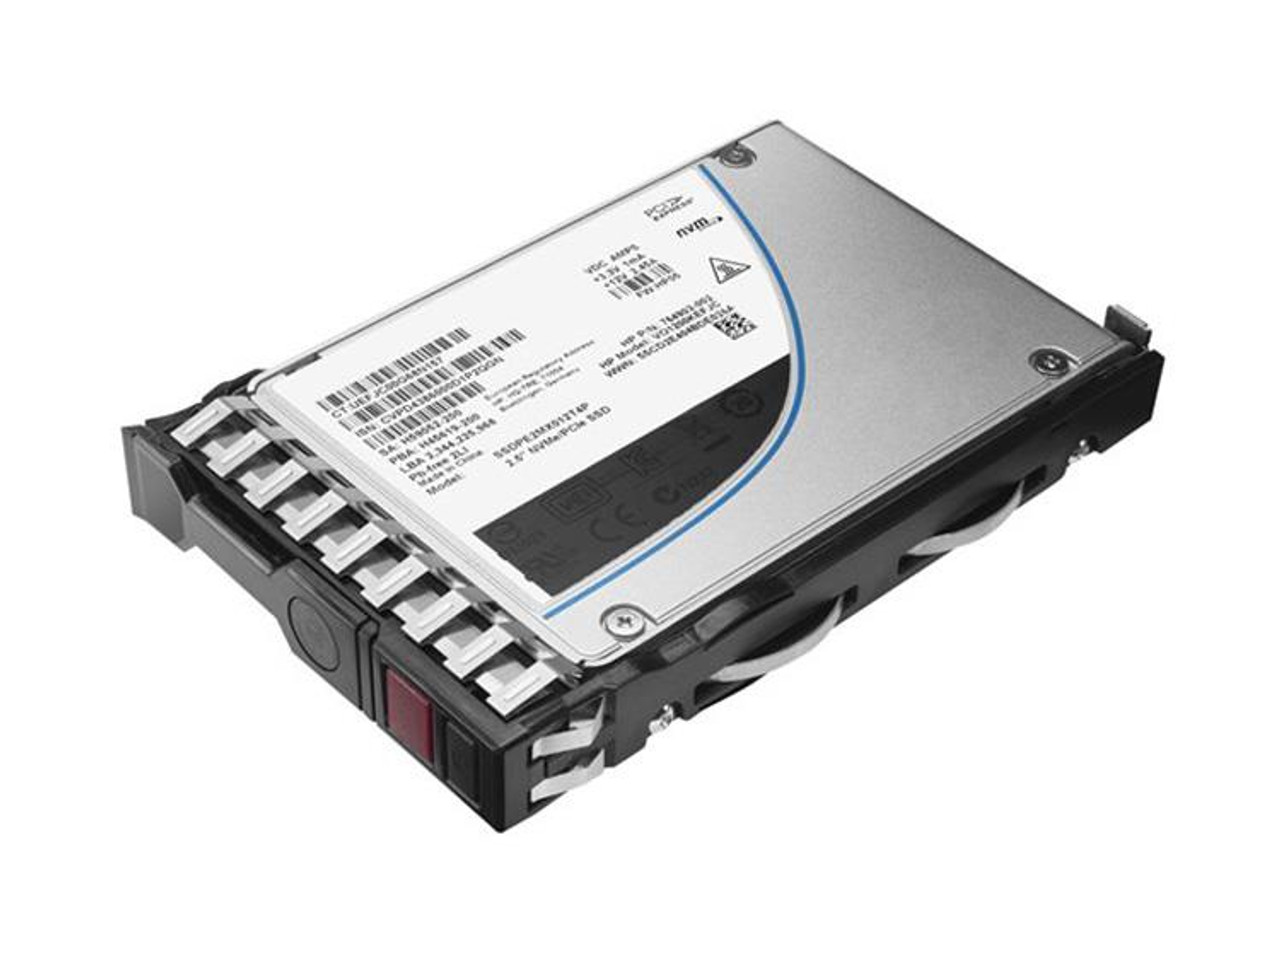 877758-B21 HPE 1.92TB MLC SATA 6Gbps Hot Swap Read Intensive 2.5-inch Internal Solid State Drive (SSD) with Smart Carrier